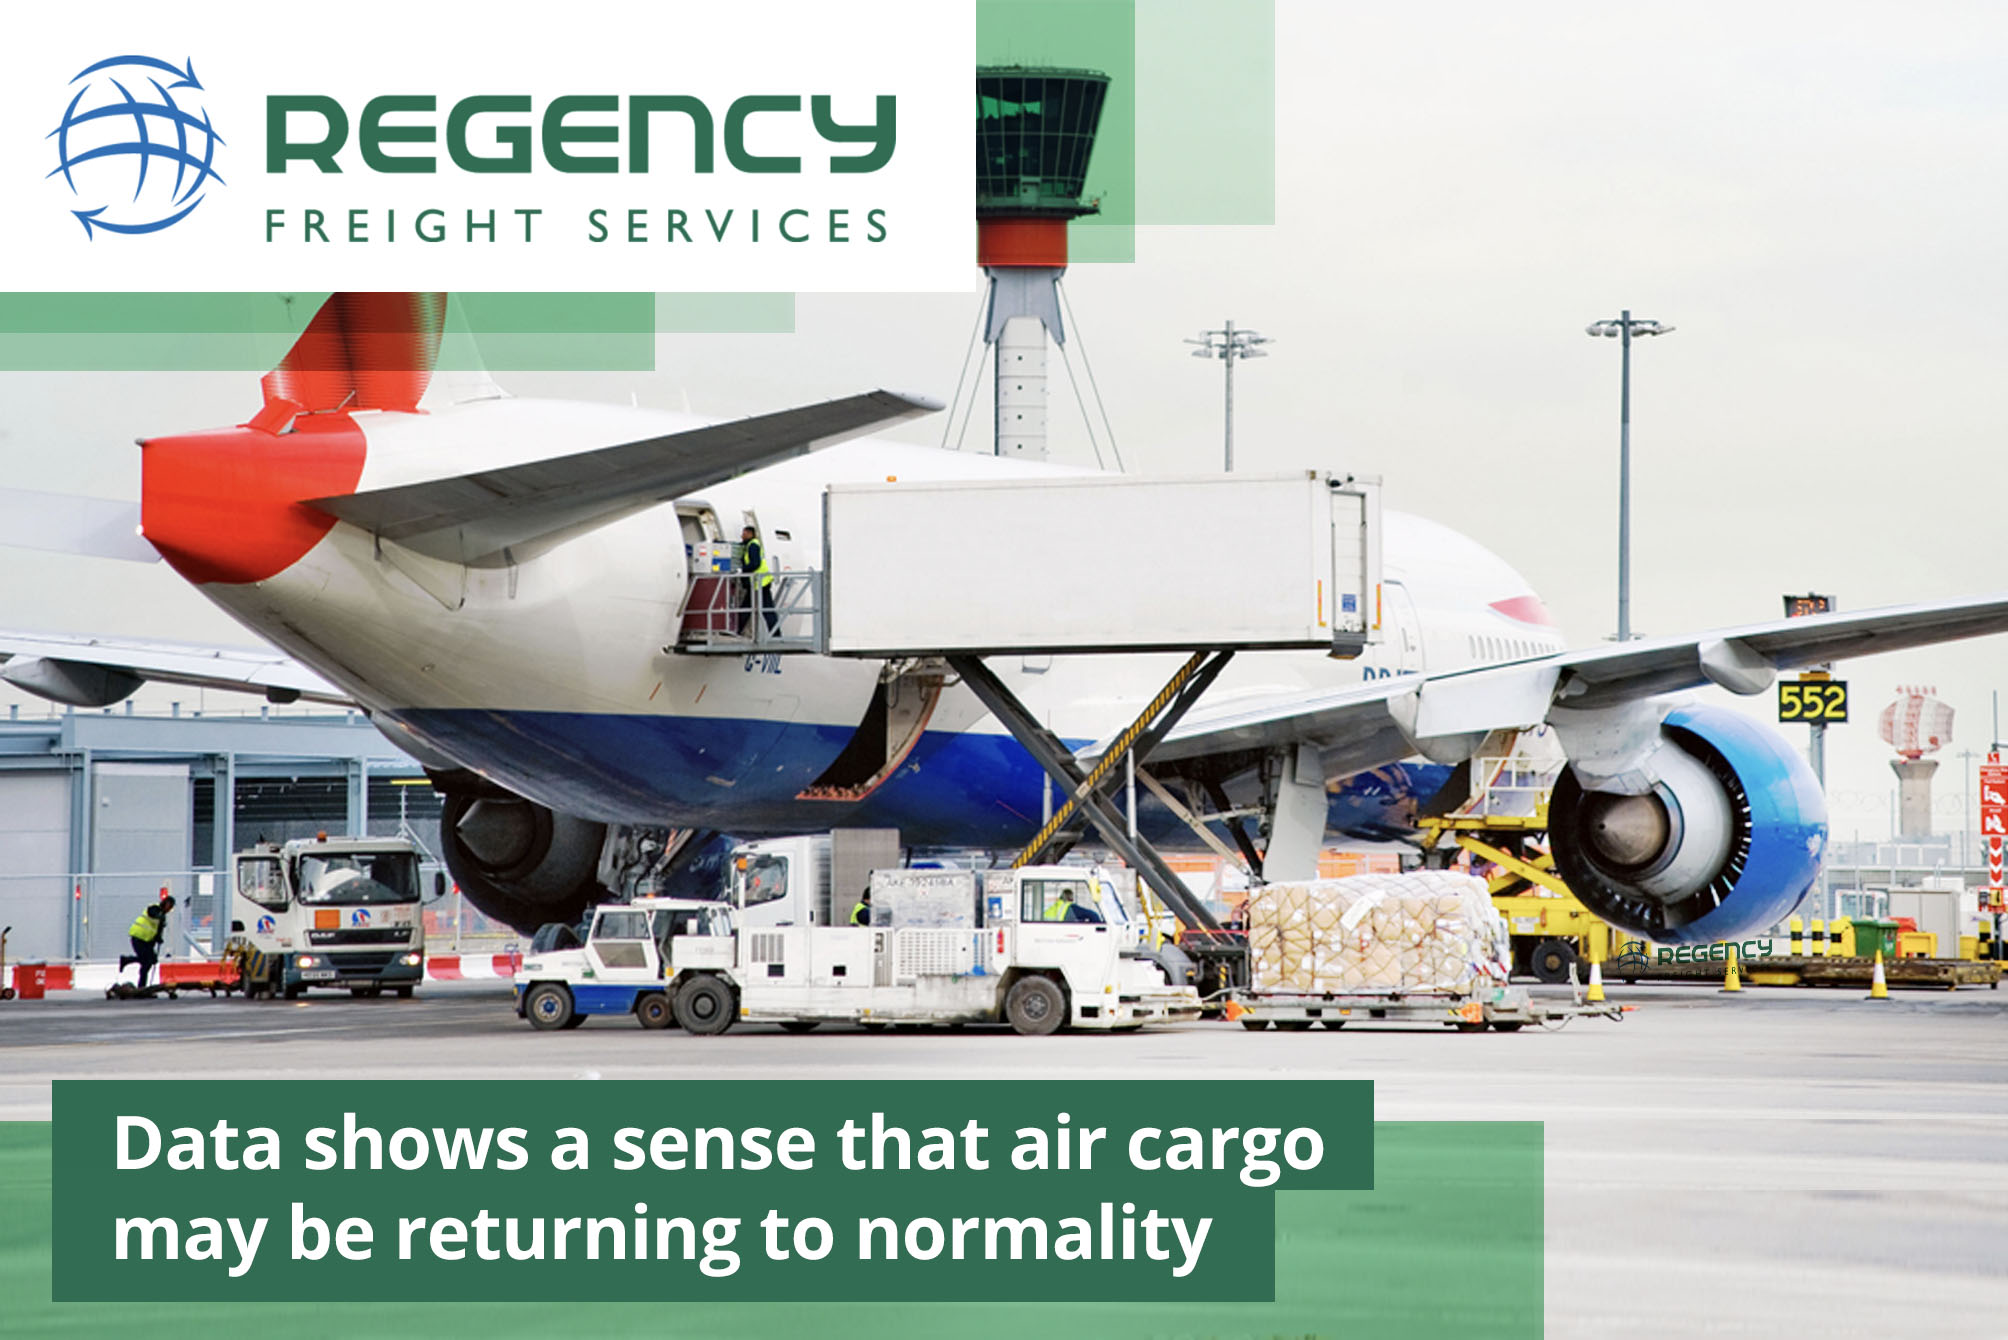 Data shows a sense that air cargo may be returning to normality